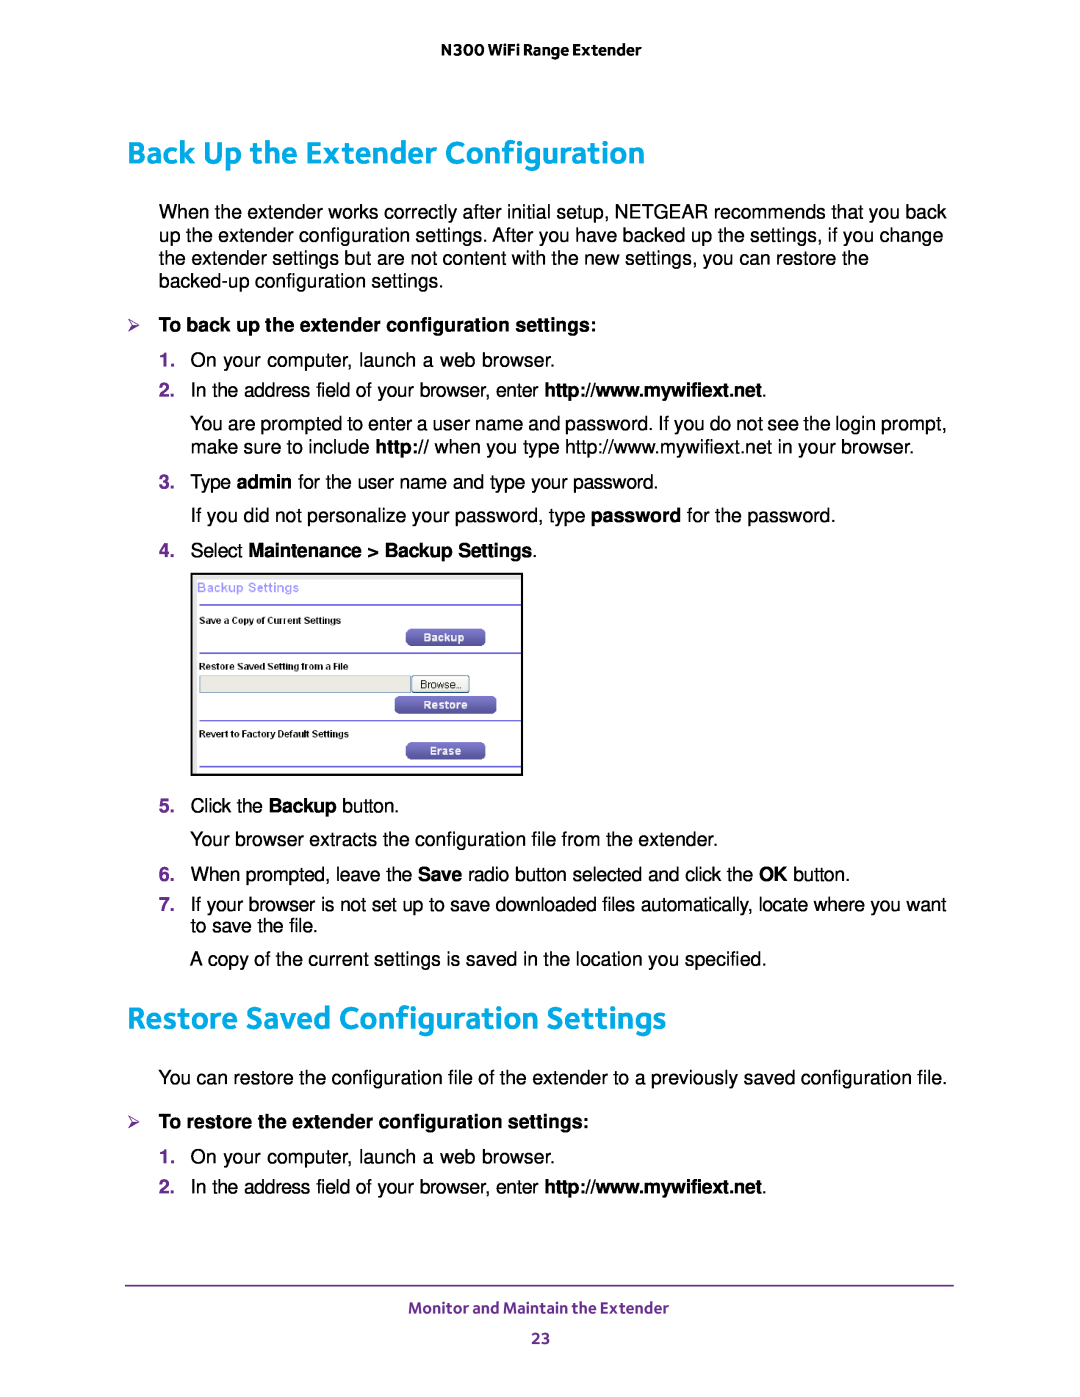 NETGEAR EX2700 user manual Back Up the Extender Configuration, Restore Saved Configuration Settings 